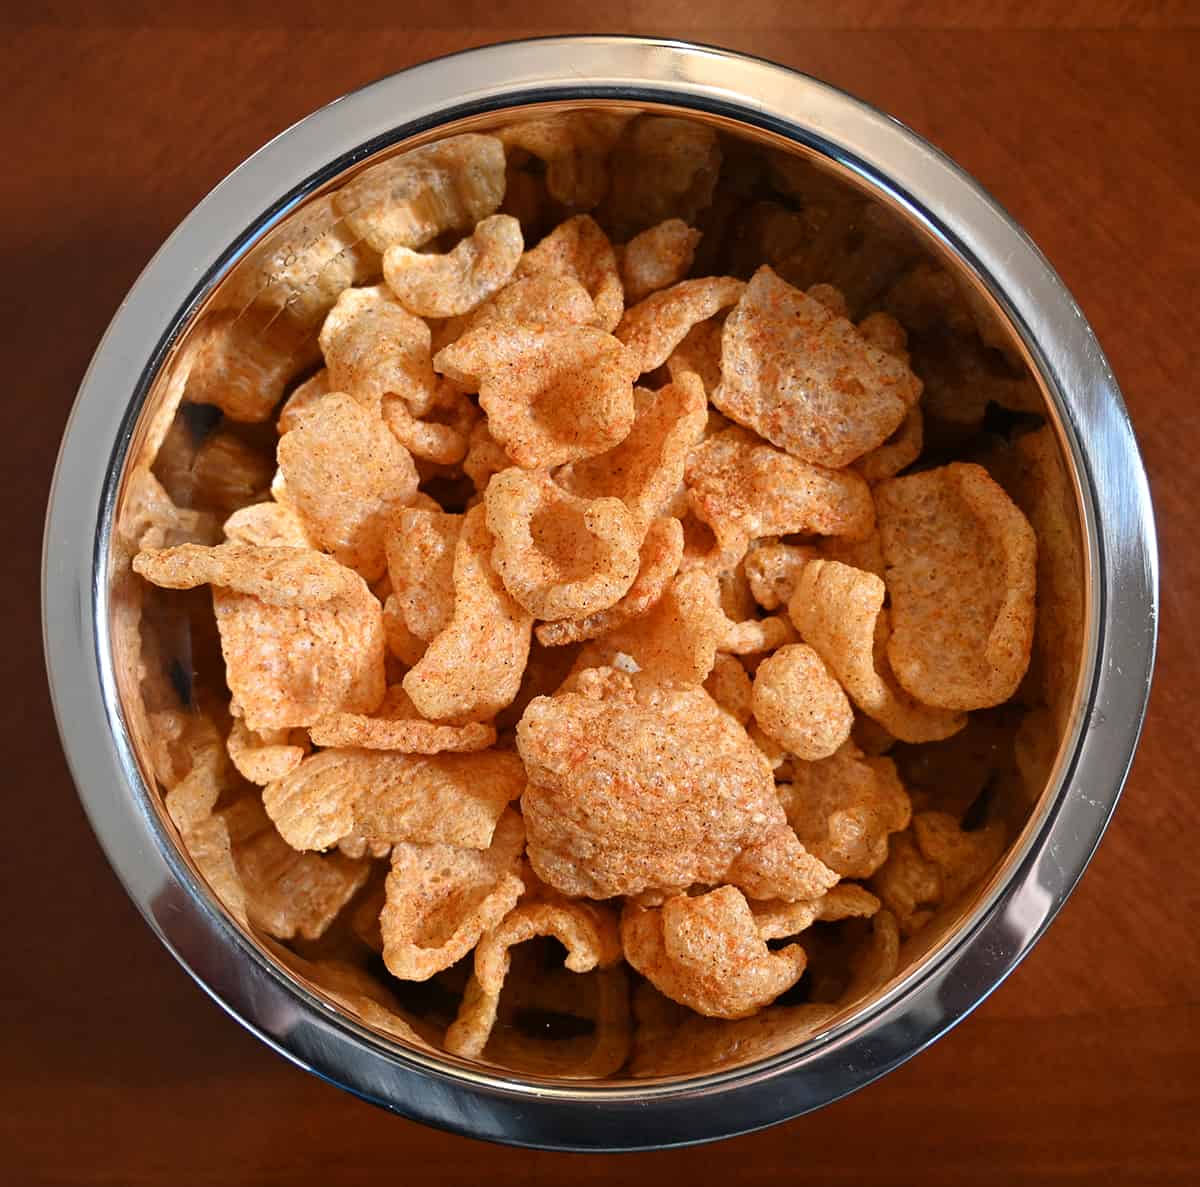 Top down image of a metal bowl full of pork rinds of all different shapes and sizes.